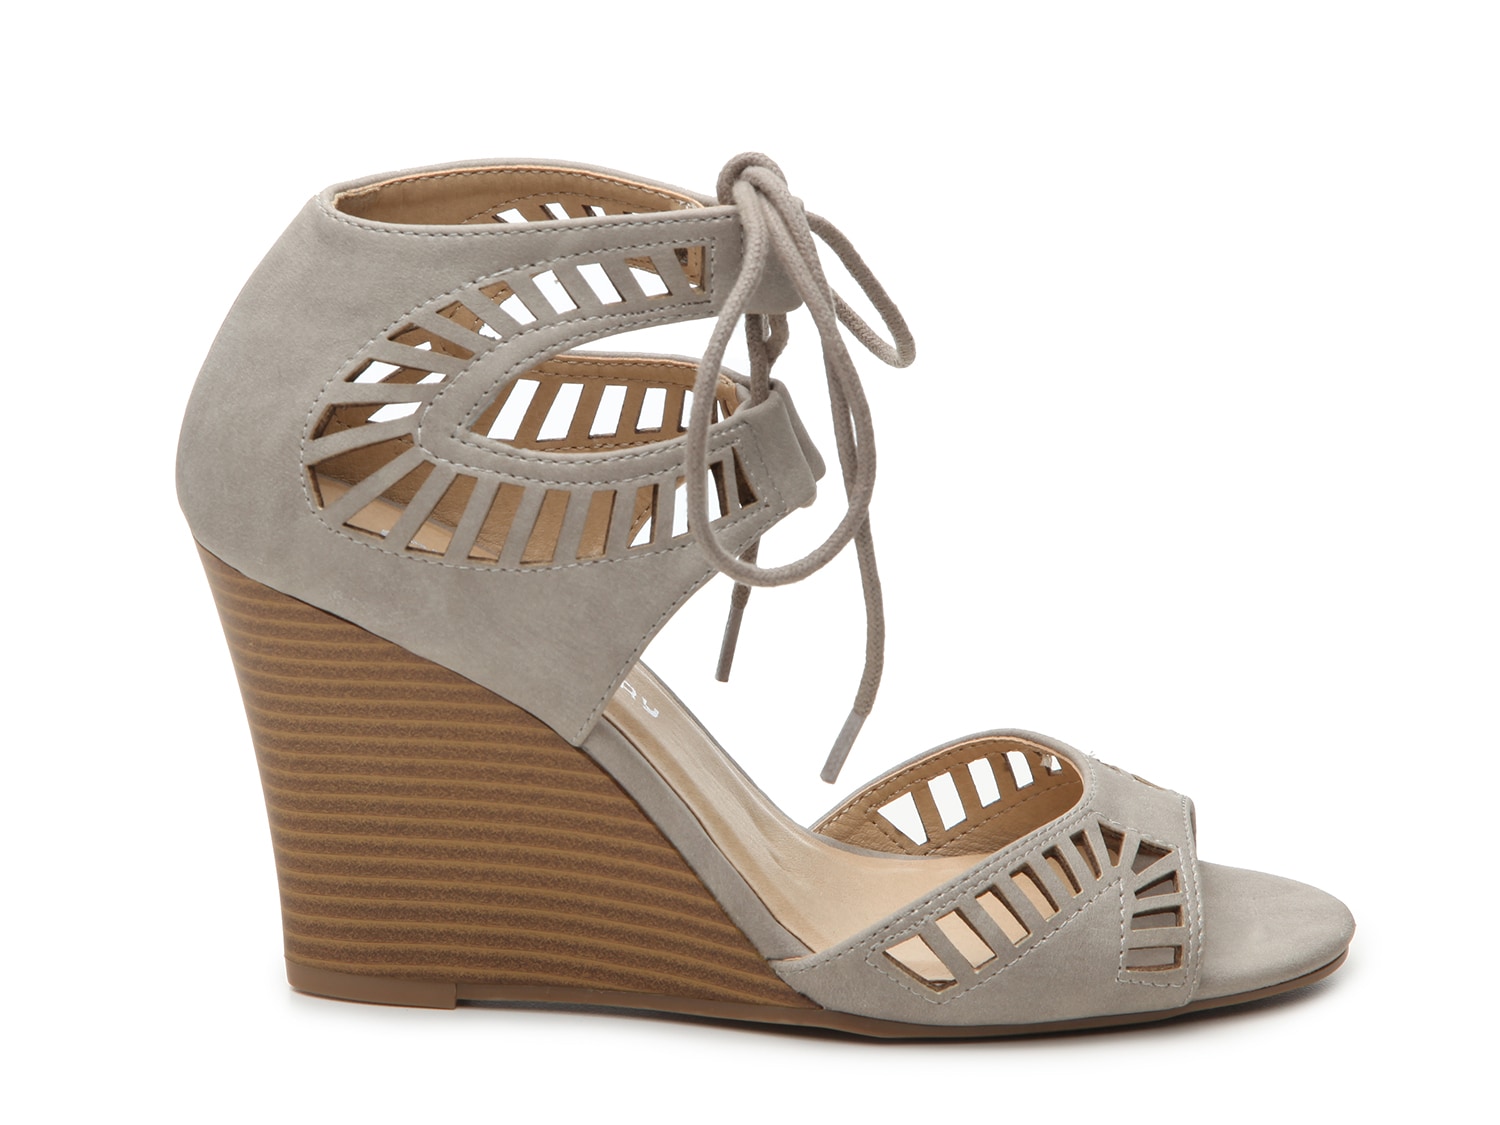 CL by Laundry Bright Sun Wedge Sandal | DSW